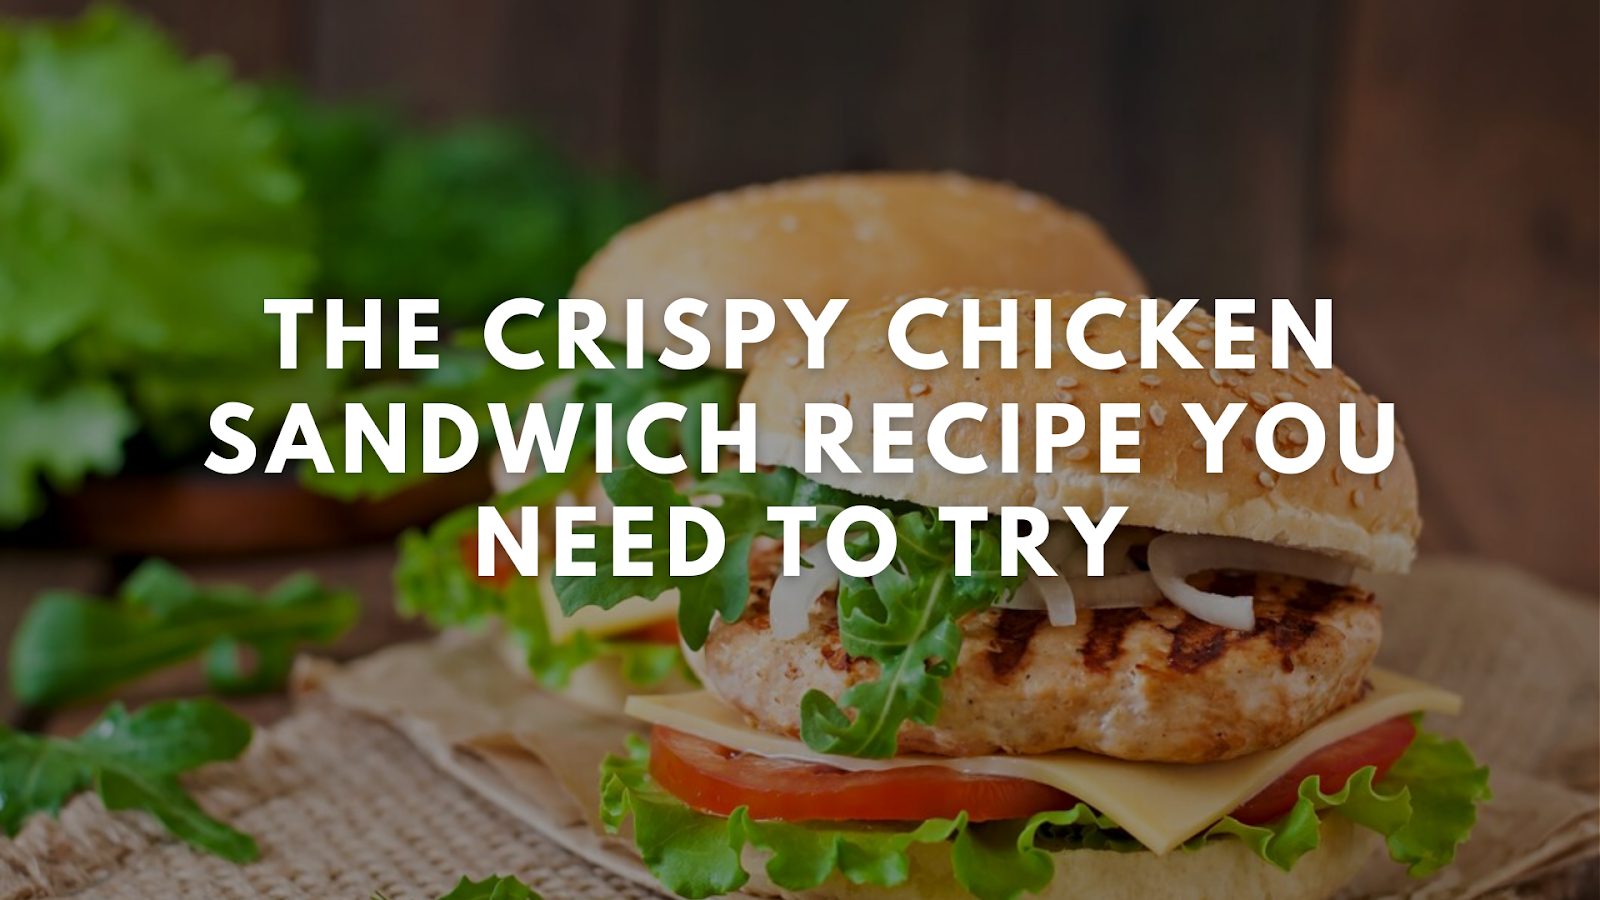 The Crispy Chicken Sandwich Recipe You Need to Try